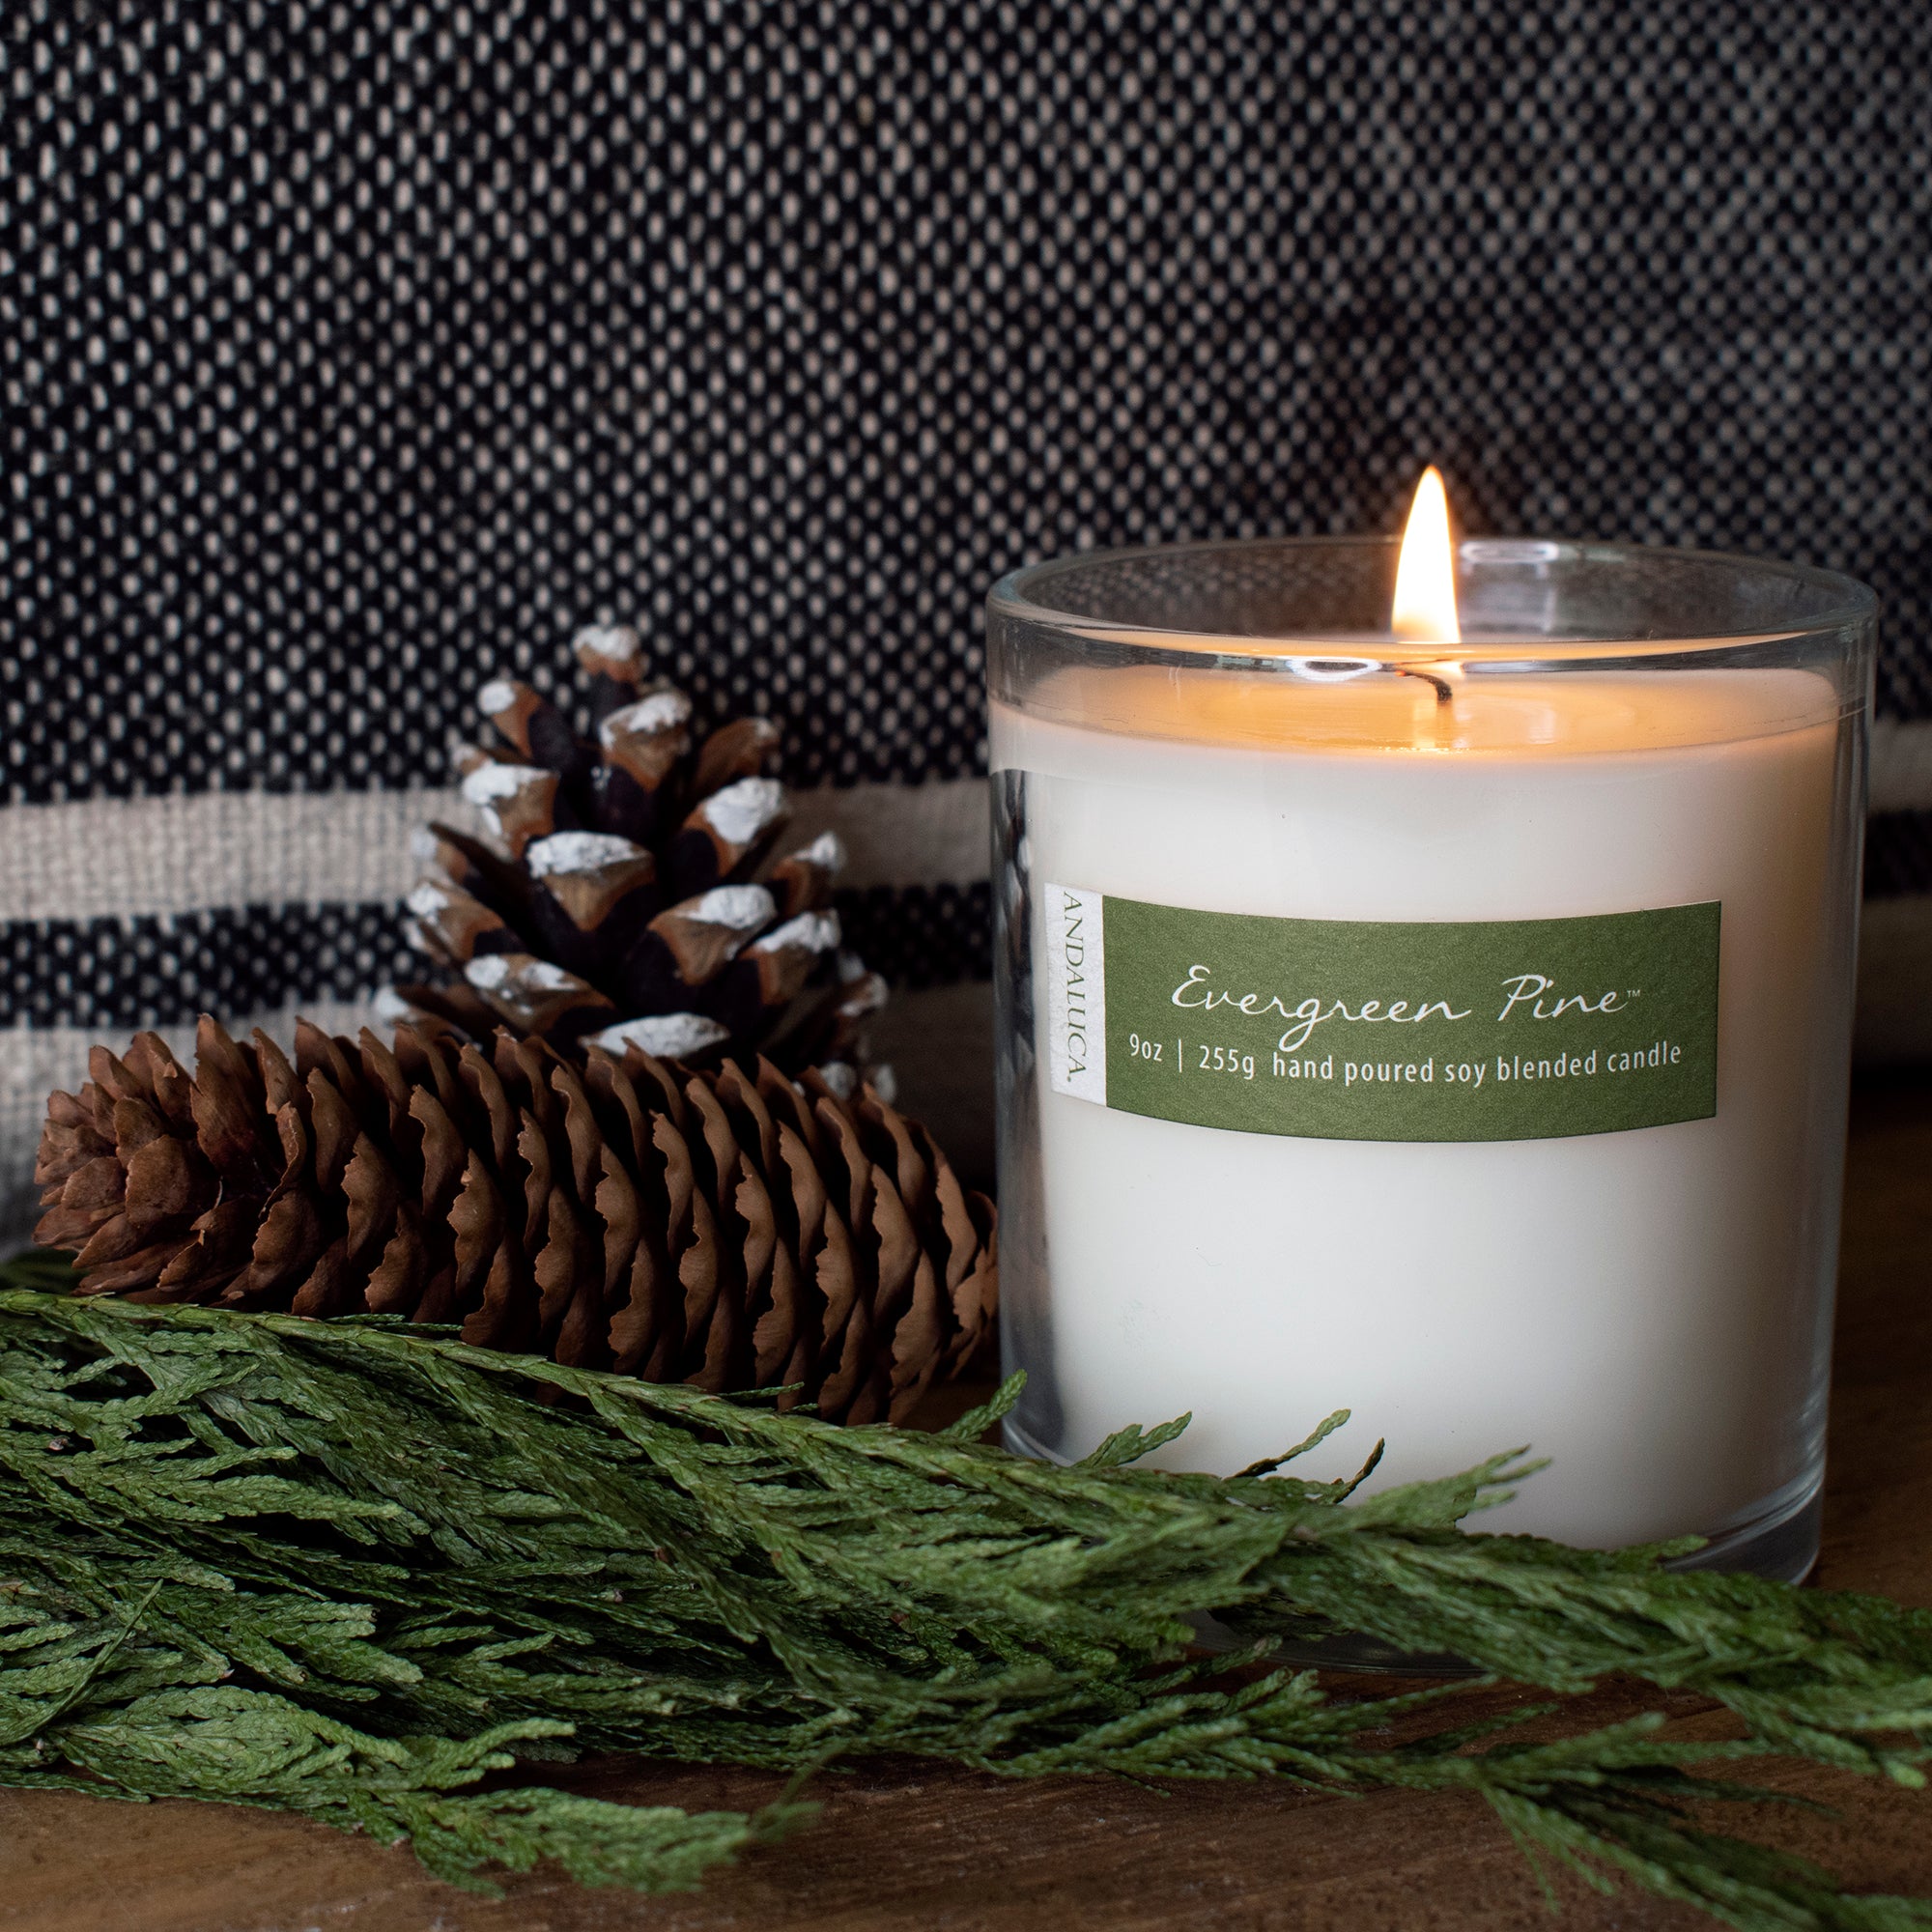 Evergreen Pine 9oz Candle